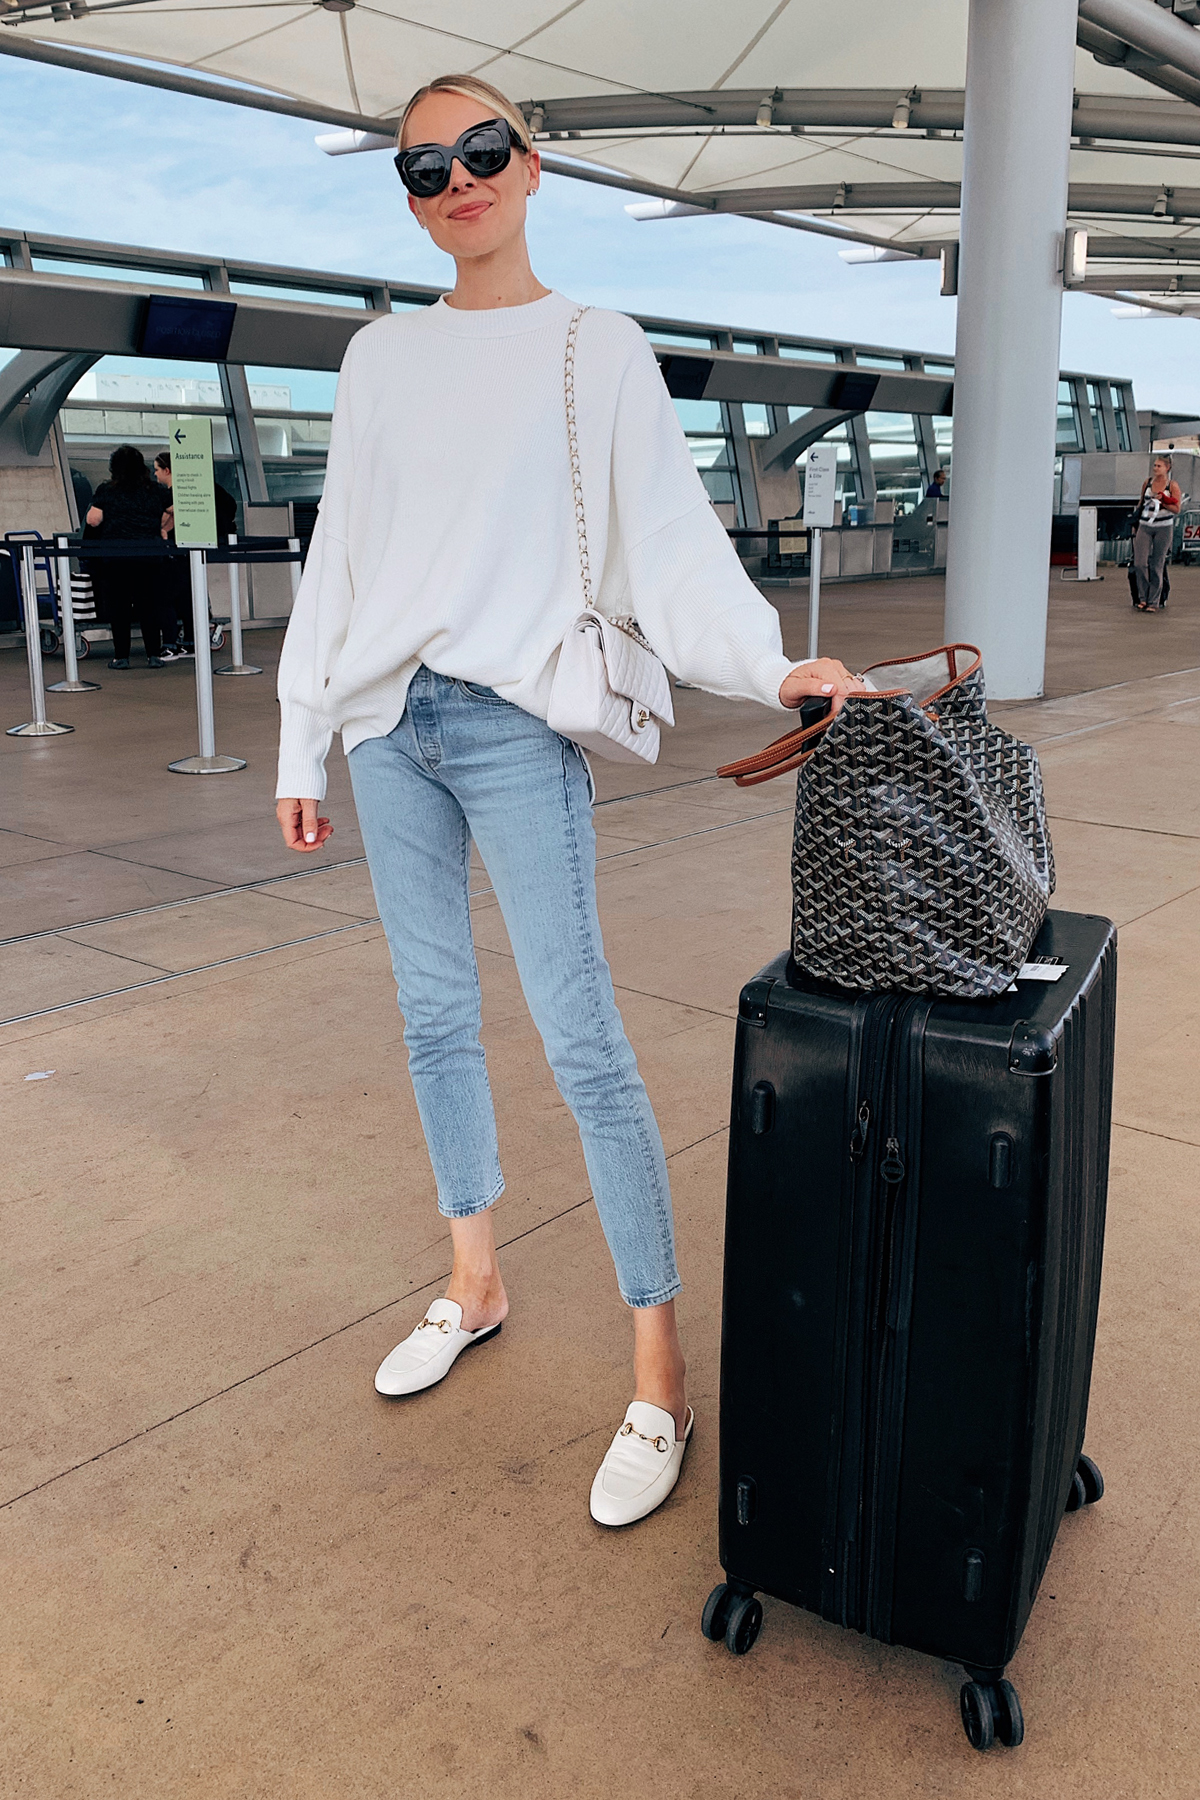 Fashion Jackson Wearing Free People White Tunic Sweater Levis High Rise Jeans White Gucci Muules White Chanel Handbag Calpak Luggage Goyard Tote Airport Outfit Travel Outfit